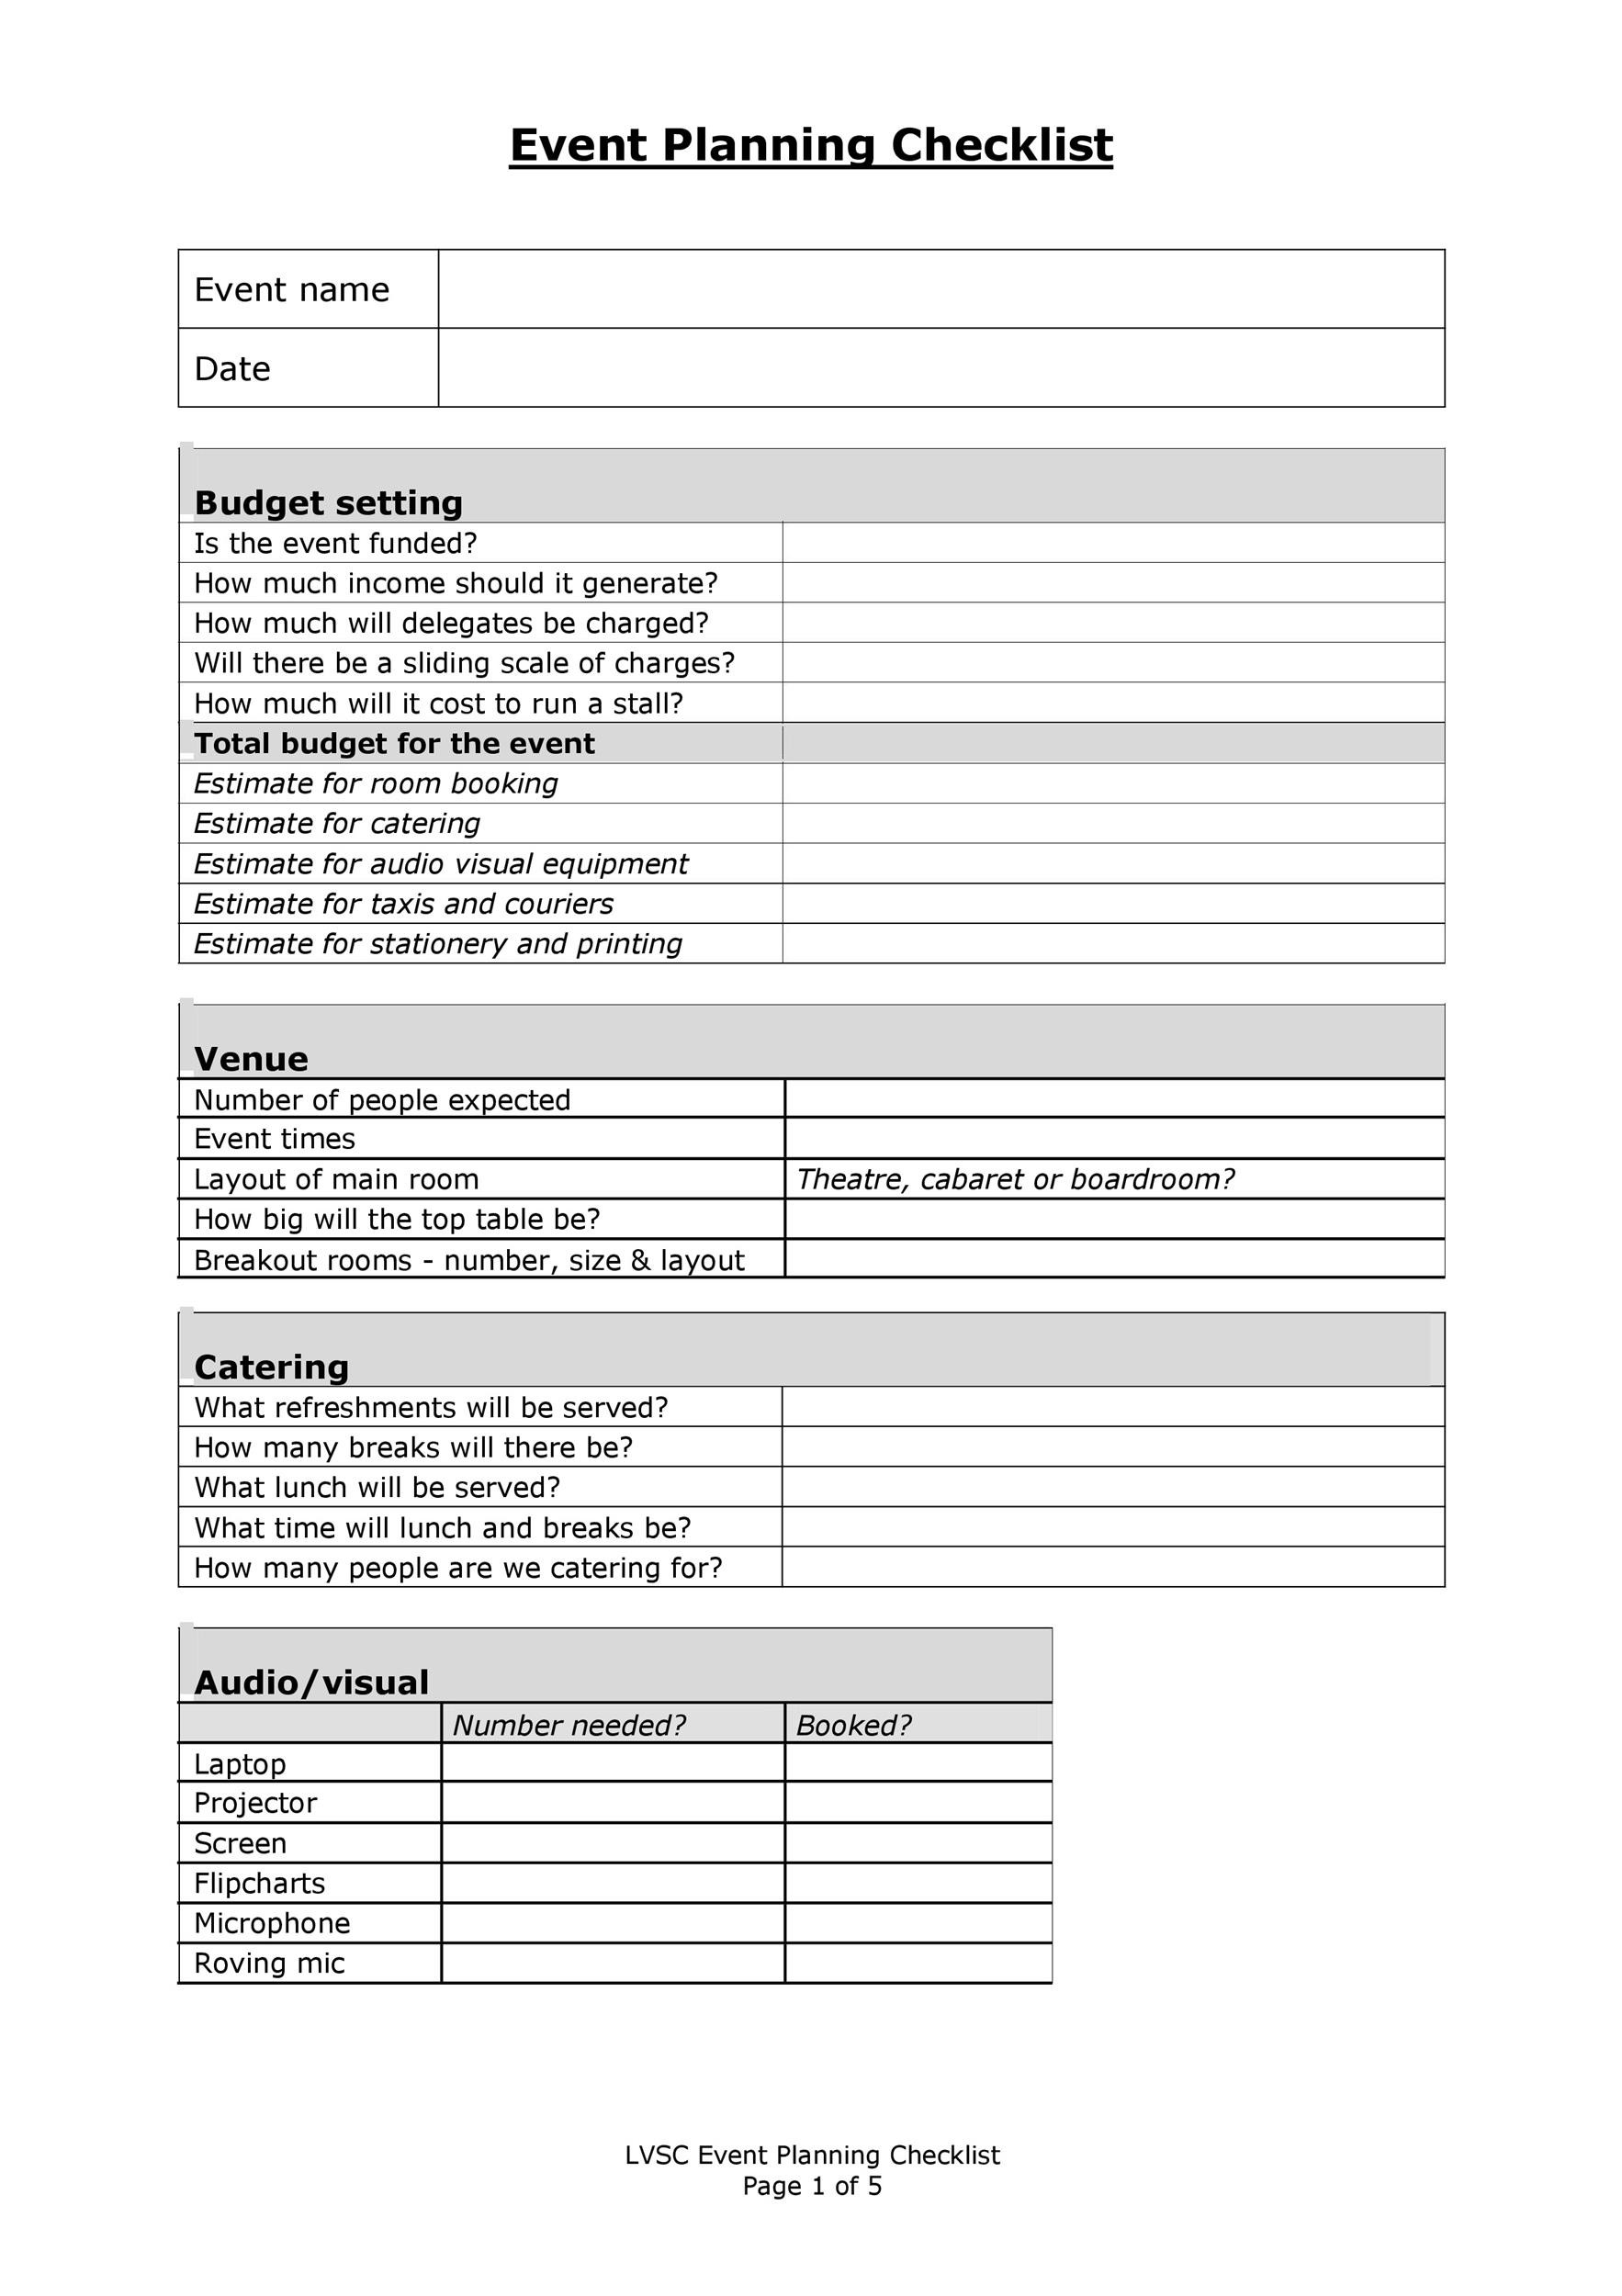 printable-event-planning-checklist-template